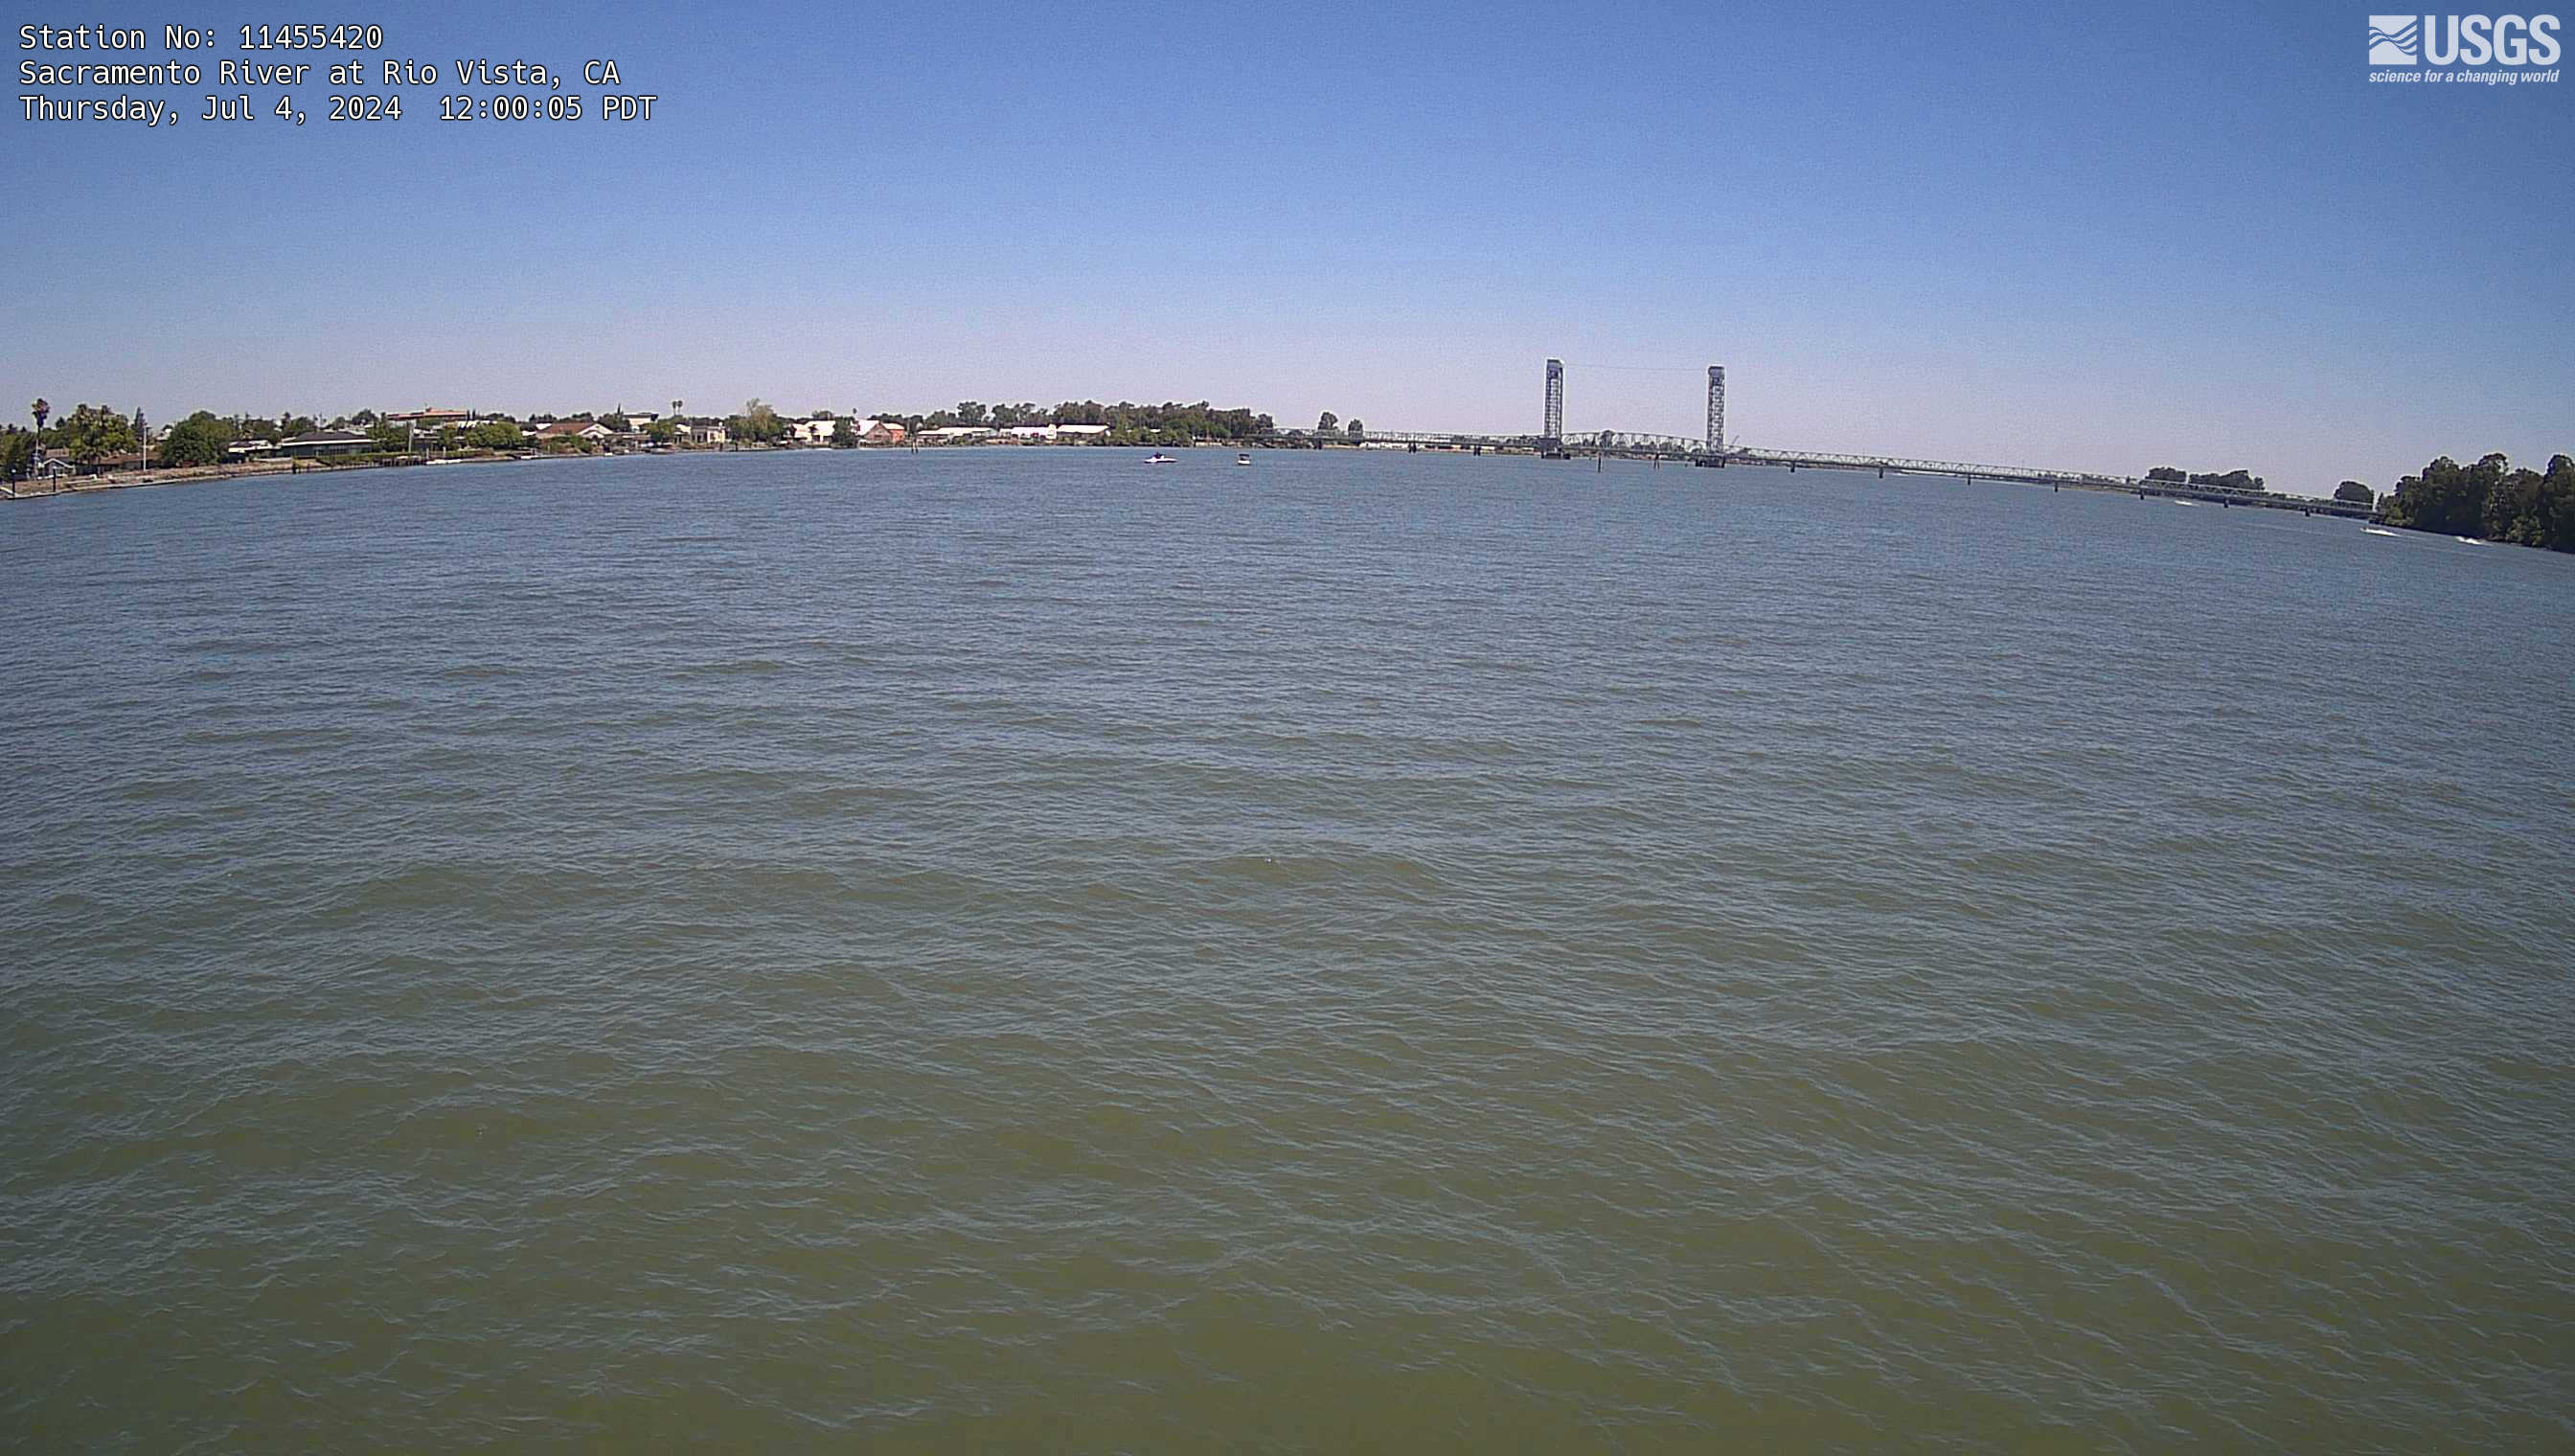 This is the latest image of the Sacramento River at Rio Vista Webcam